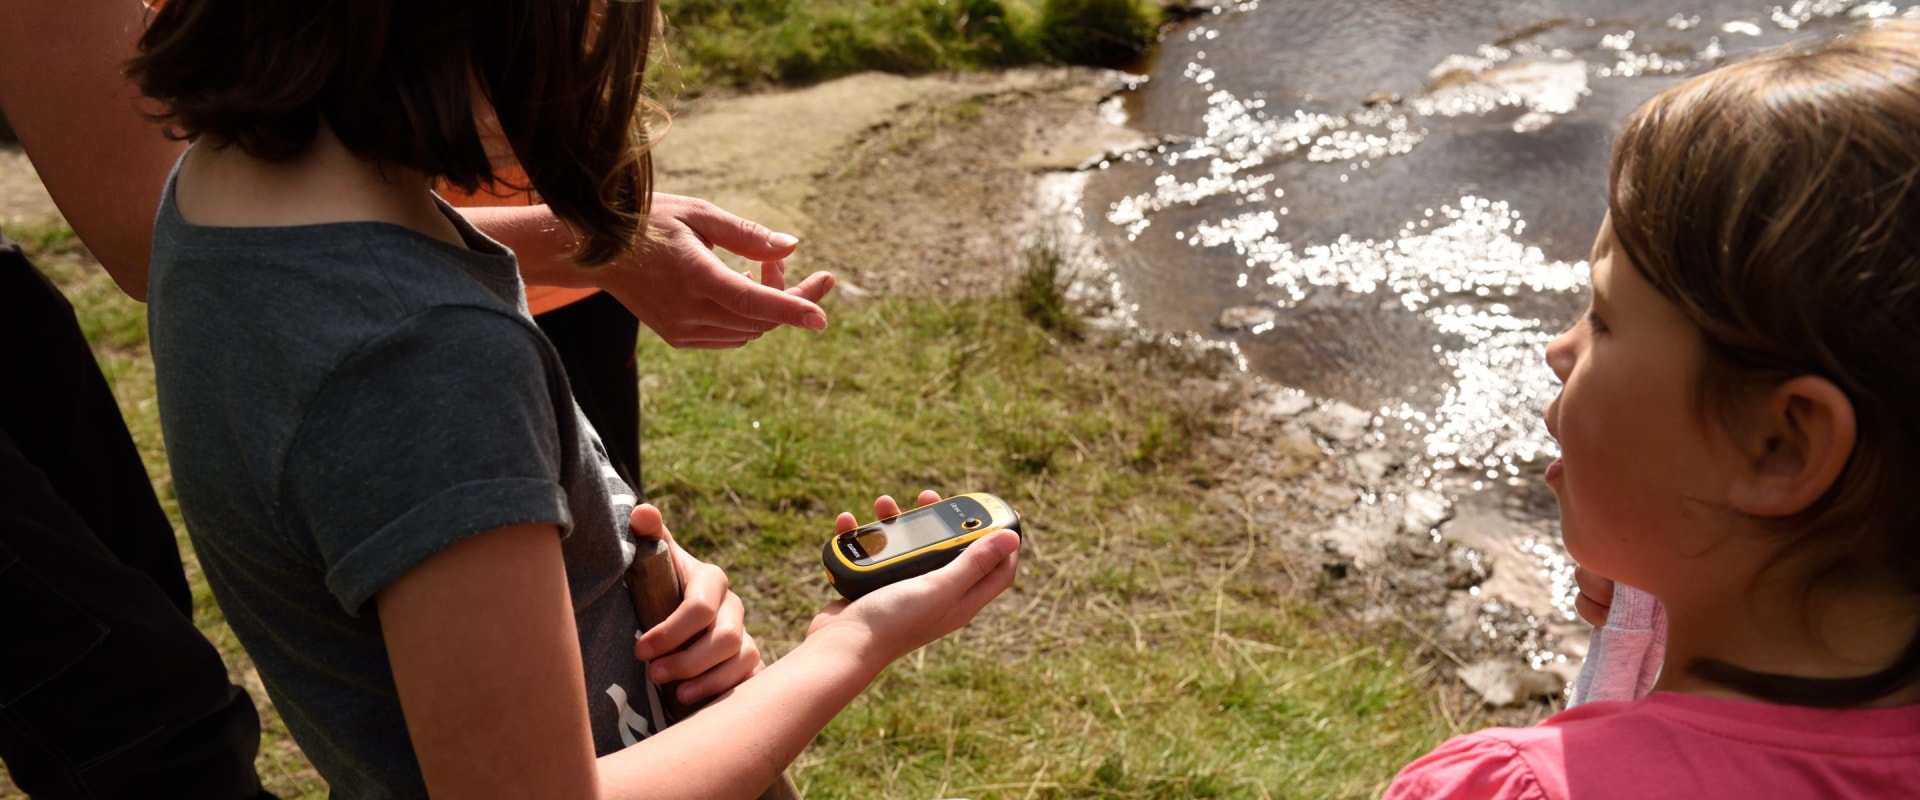 Exploring Geocaching: An Introduction to Outdoor Adventure and Family Fun